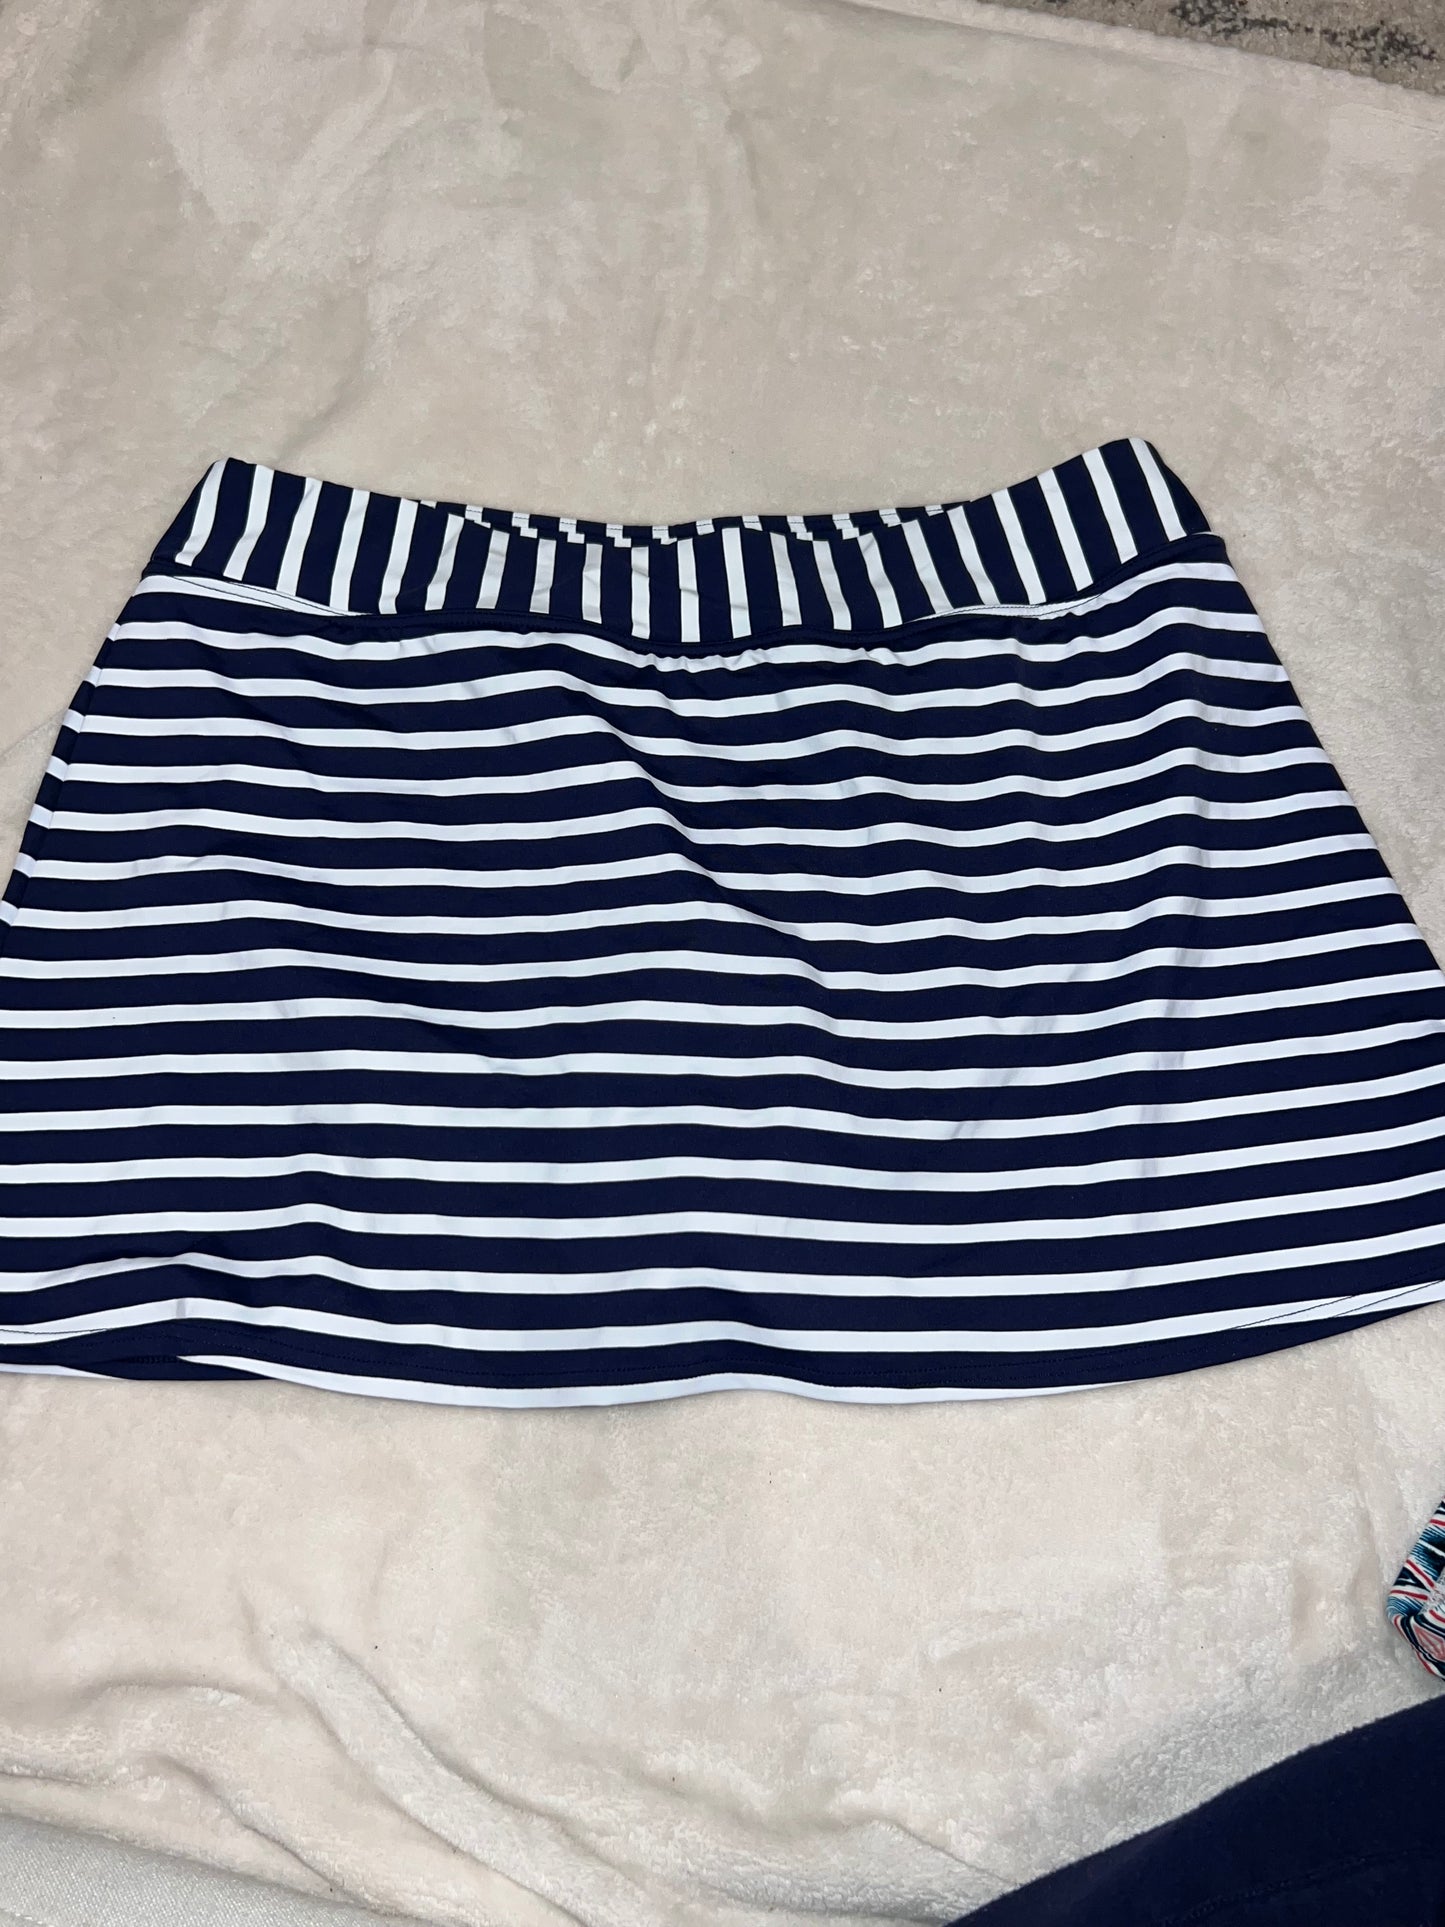 Womens Size 14 Lands End swim skirt, navy and white